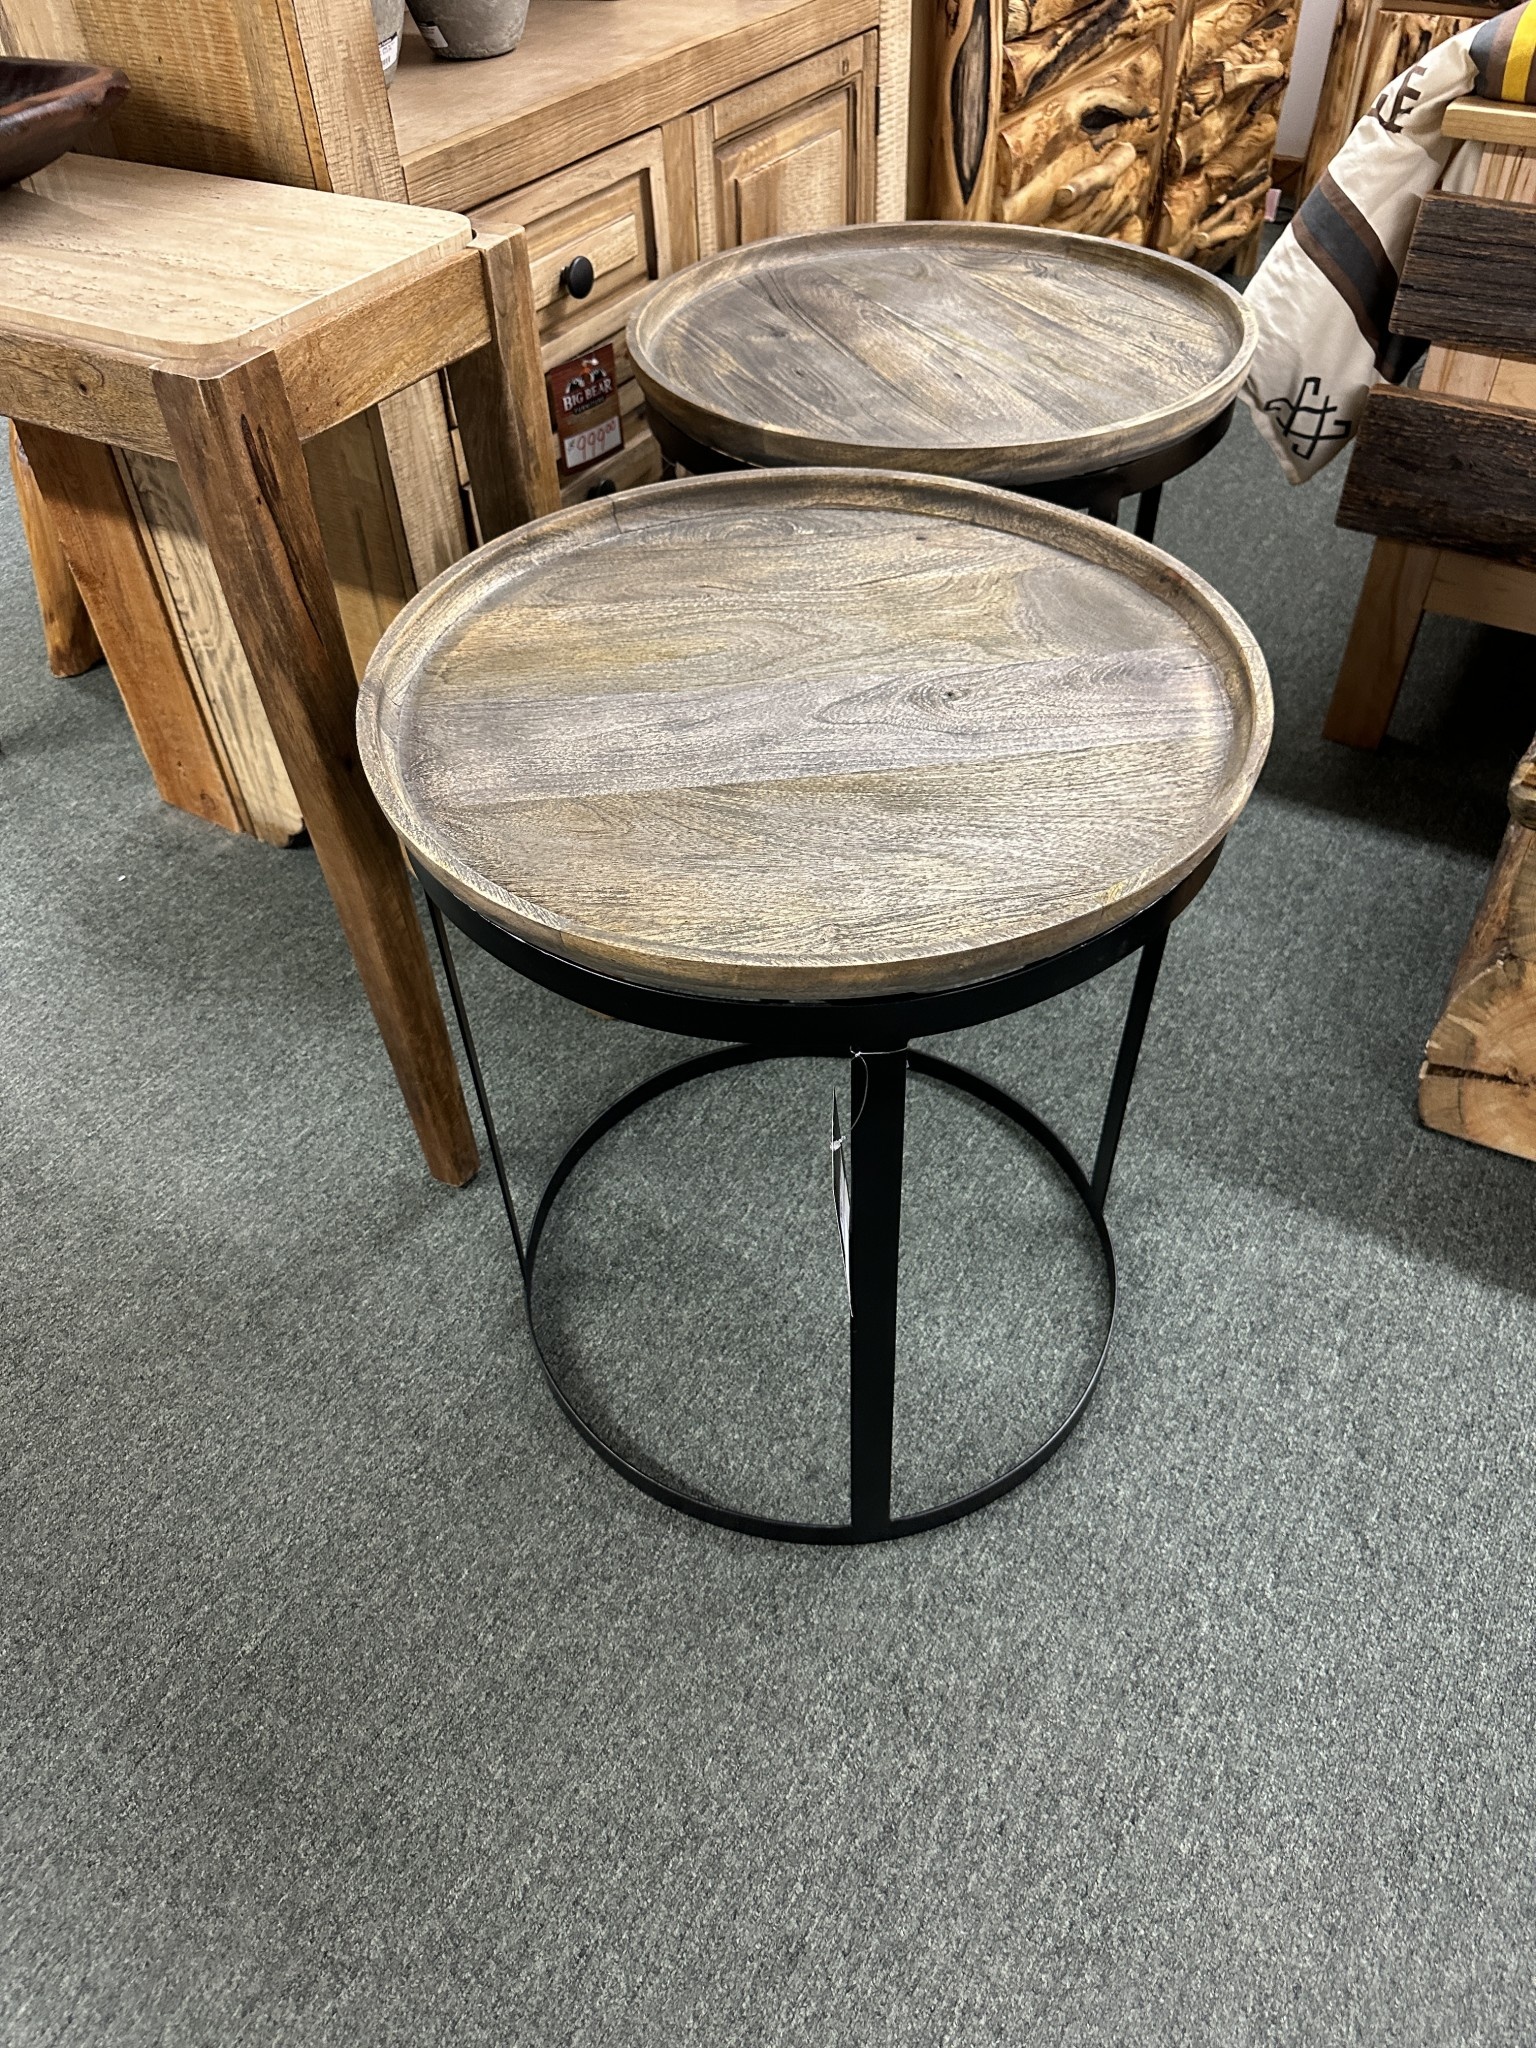 Crestview Traymore End Table 22Dia x 24H